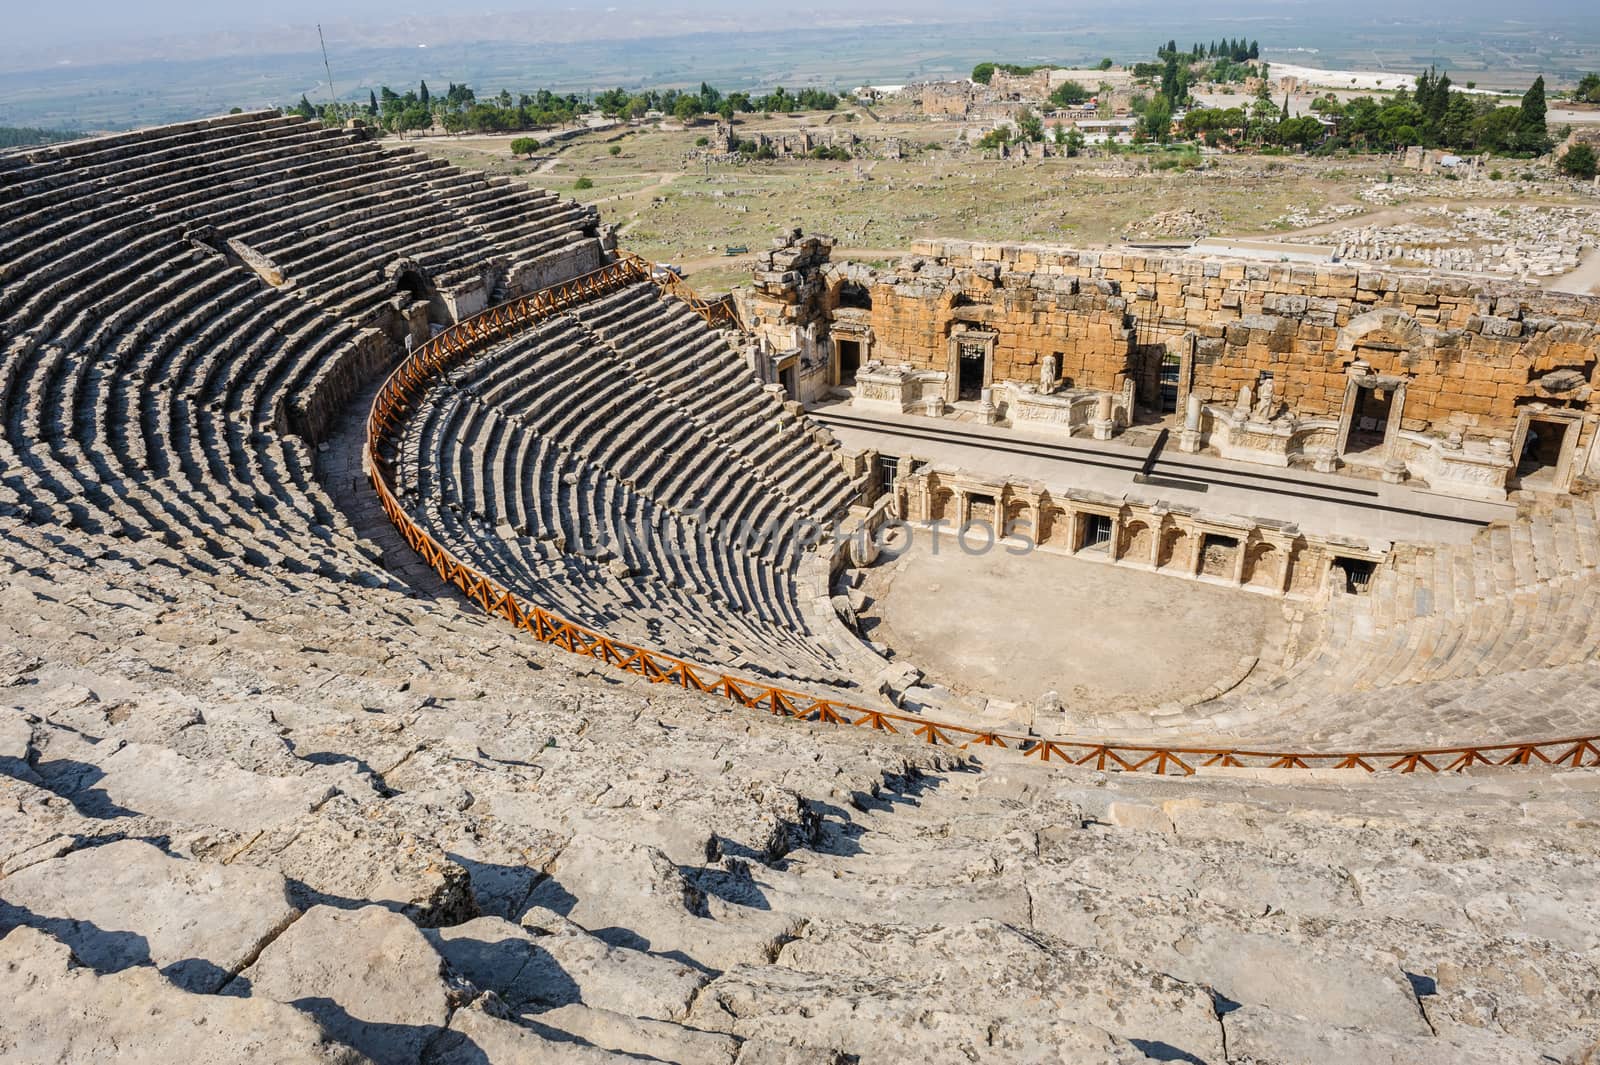 Ruins of theater in ancient Hierapolis, now Pamukkale, Turkey